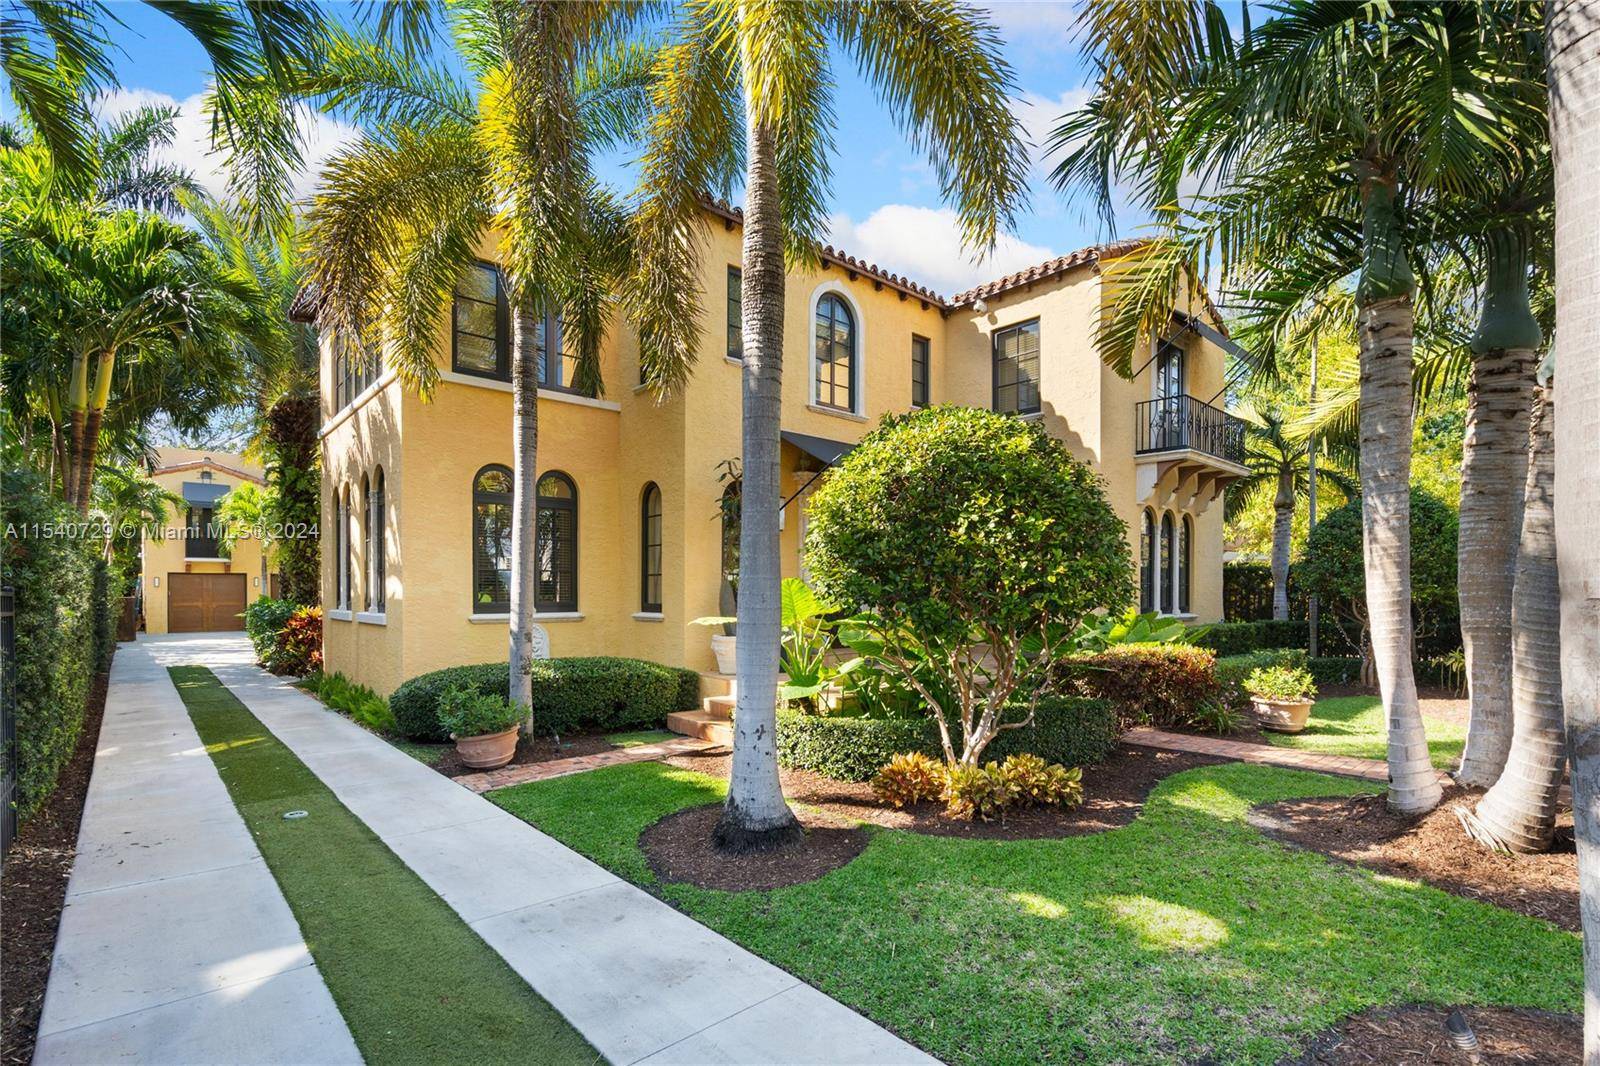 Beautifully renovated and restored 1920s architectural masterpiece within walking distance to Lincoln Road, the Convention Center, and the ocean.